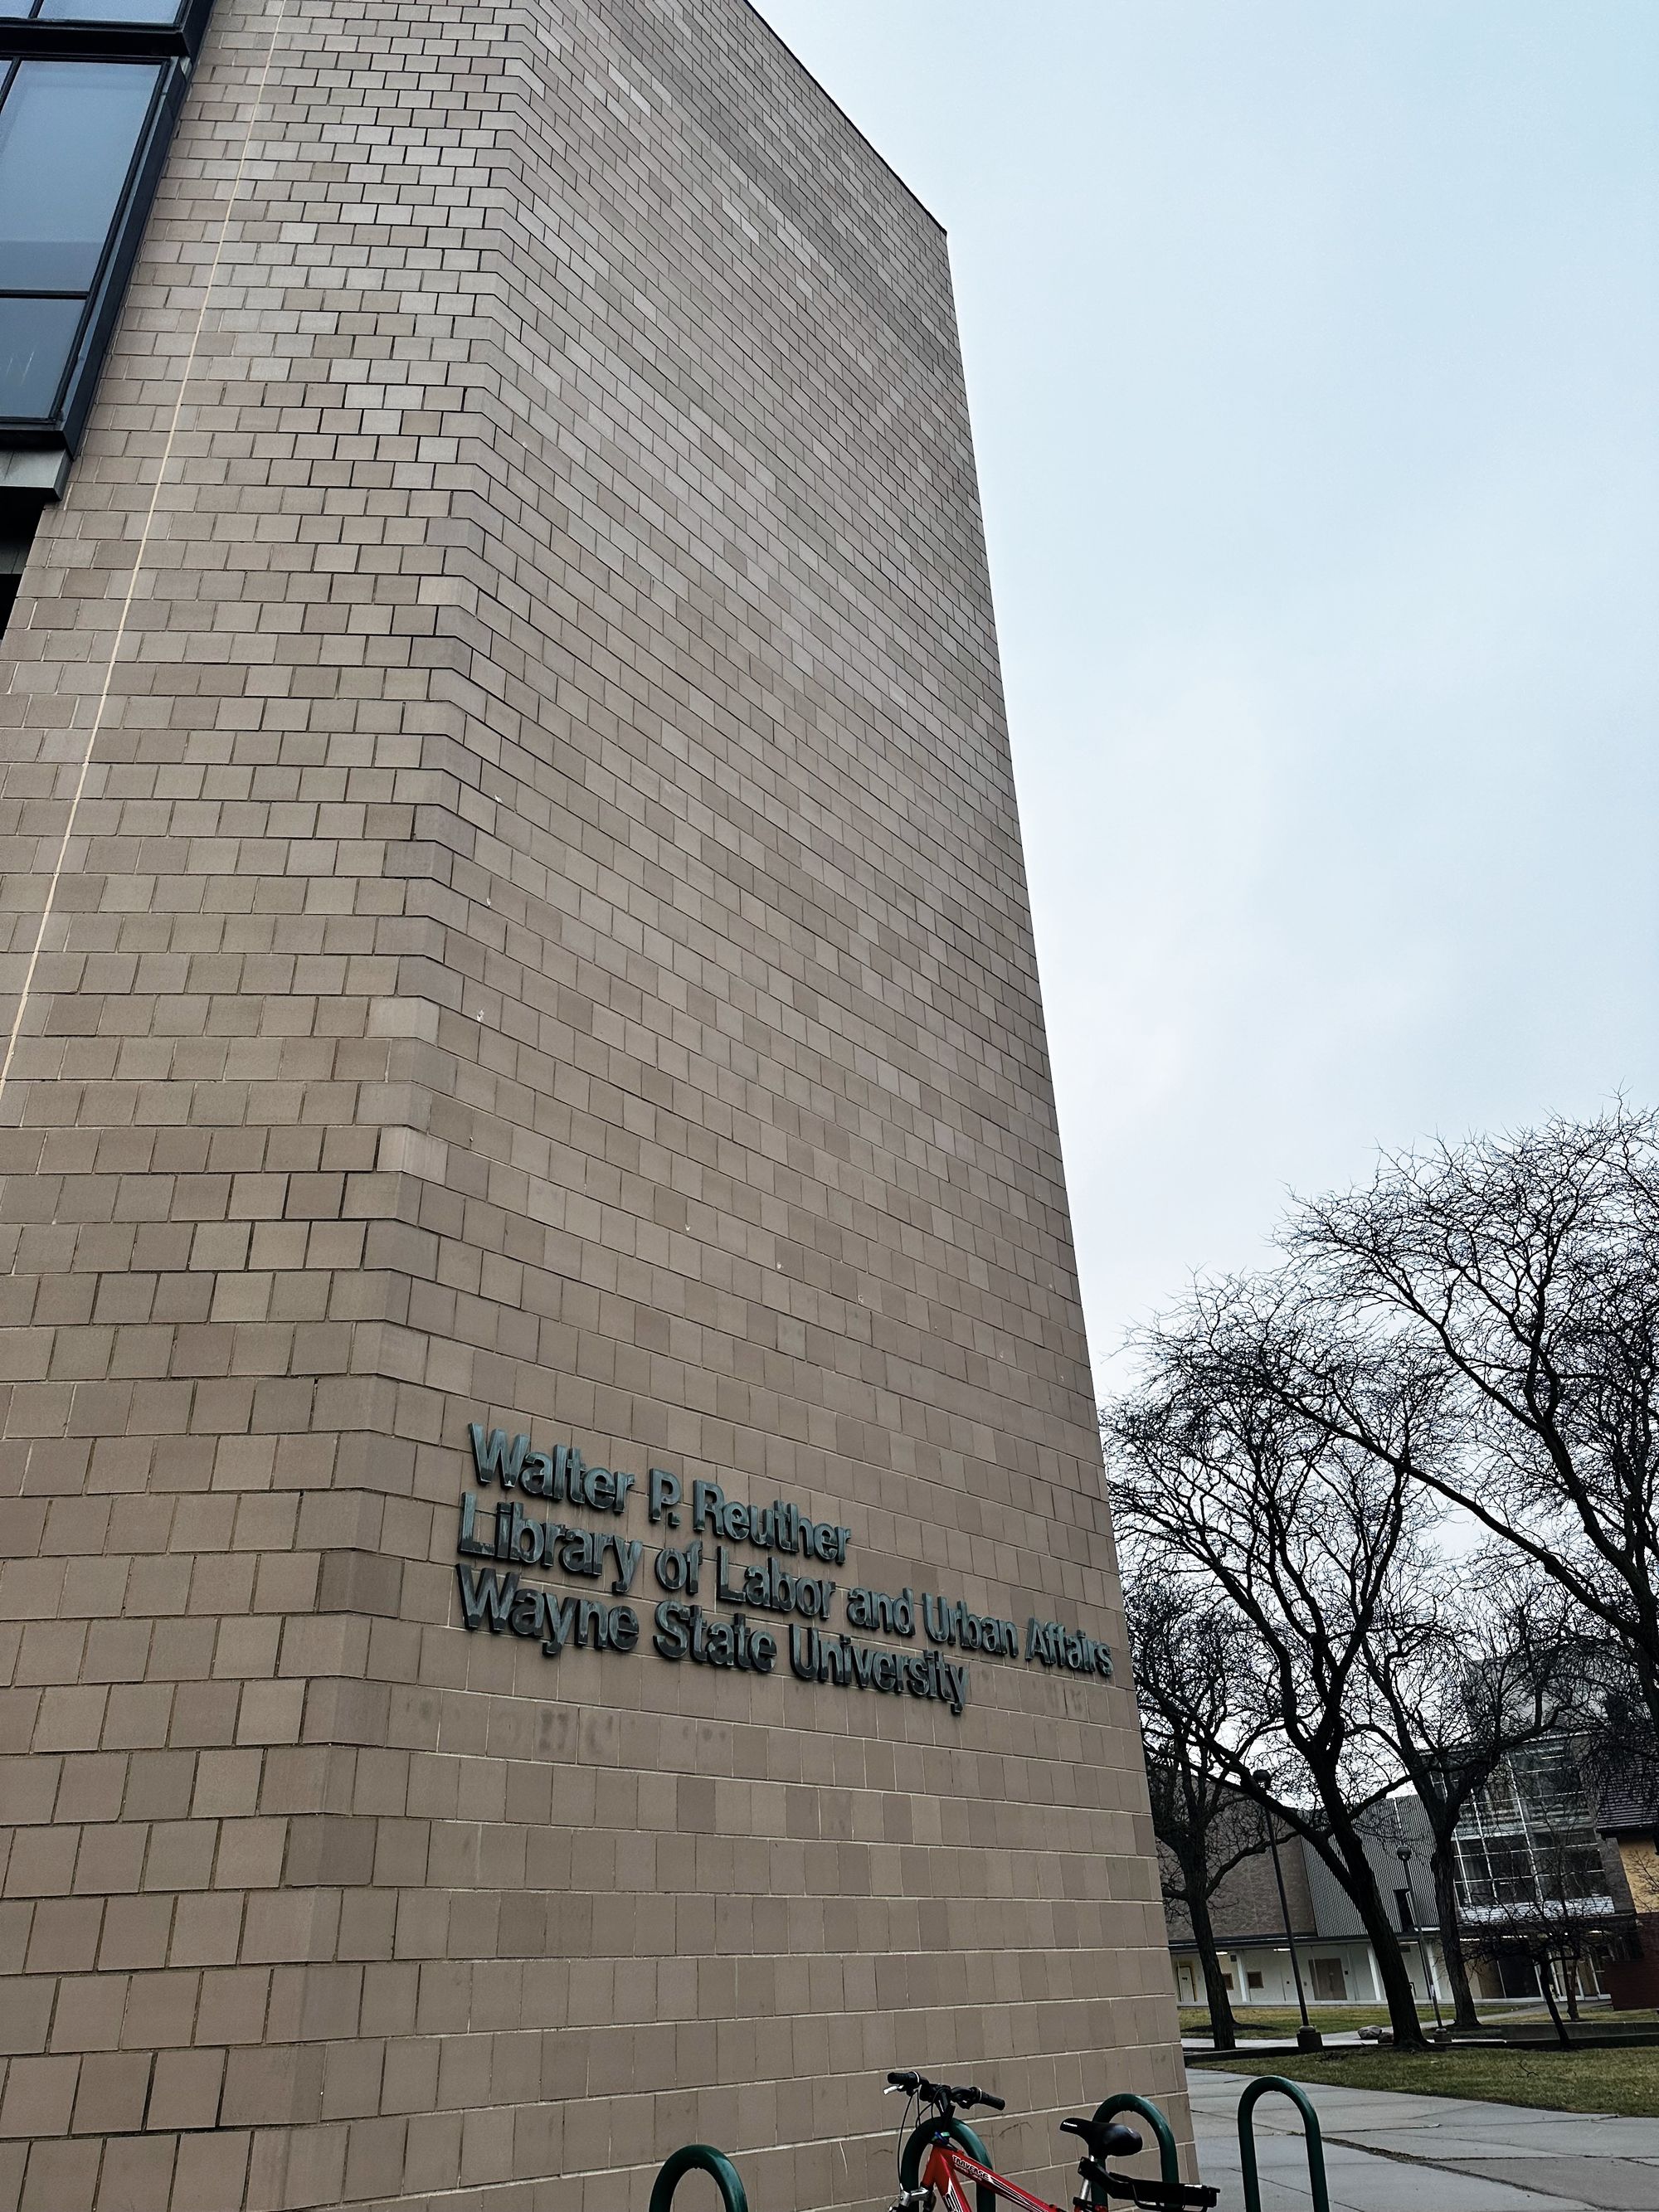 Walter P. Reuther Library of Labor and Urban Affairs, Wayne State University, Detroit